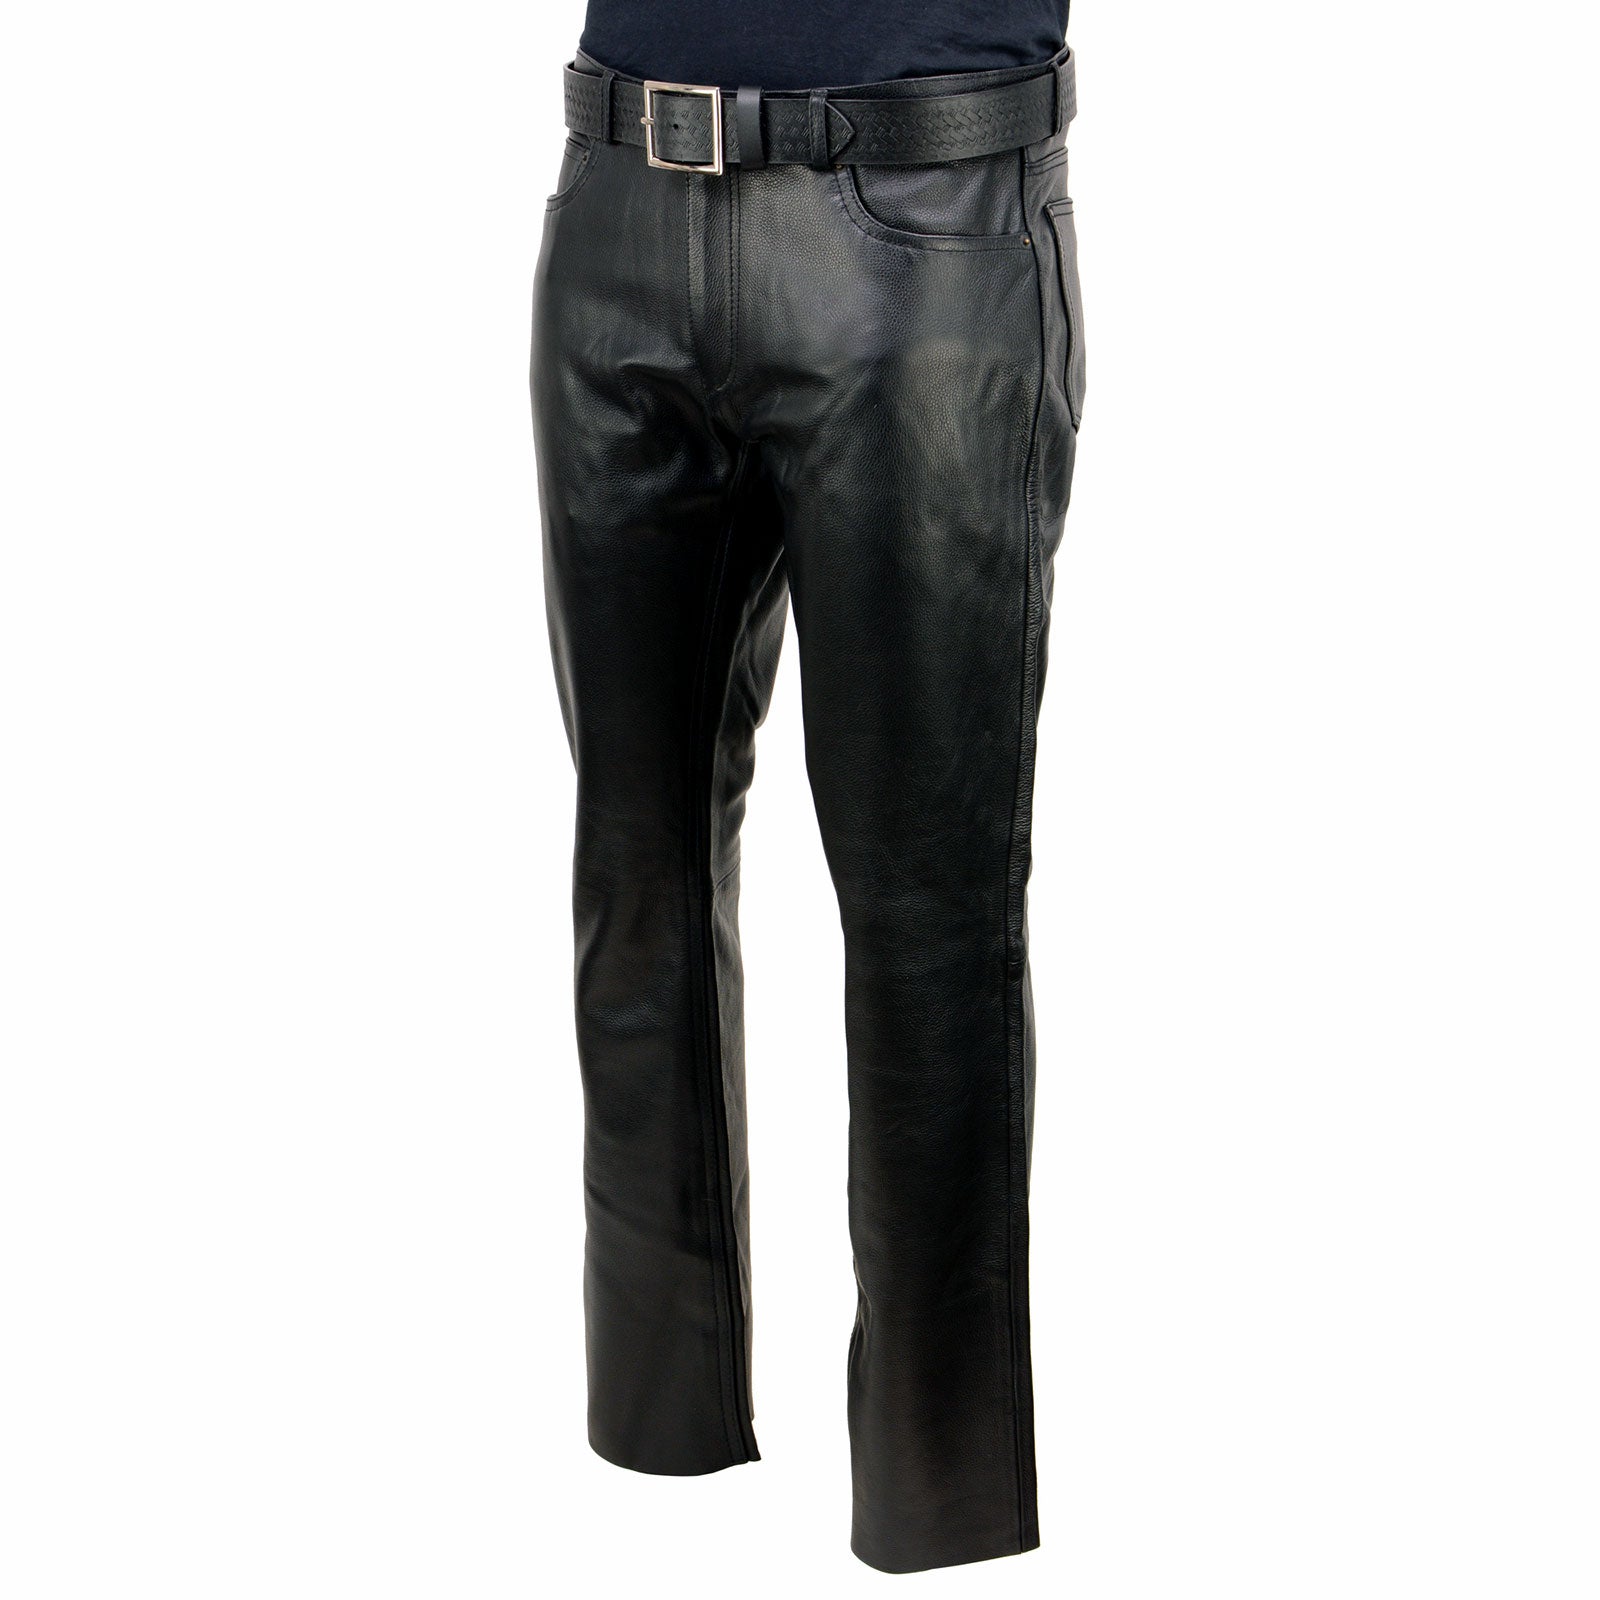 Mens Motorcycle Black Leather Pants Jeans Style Motorcycle Riding Pants for  Biker with 5 Pockets 